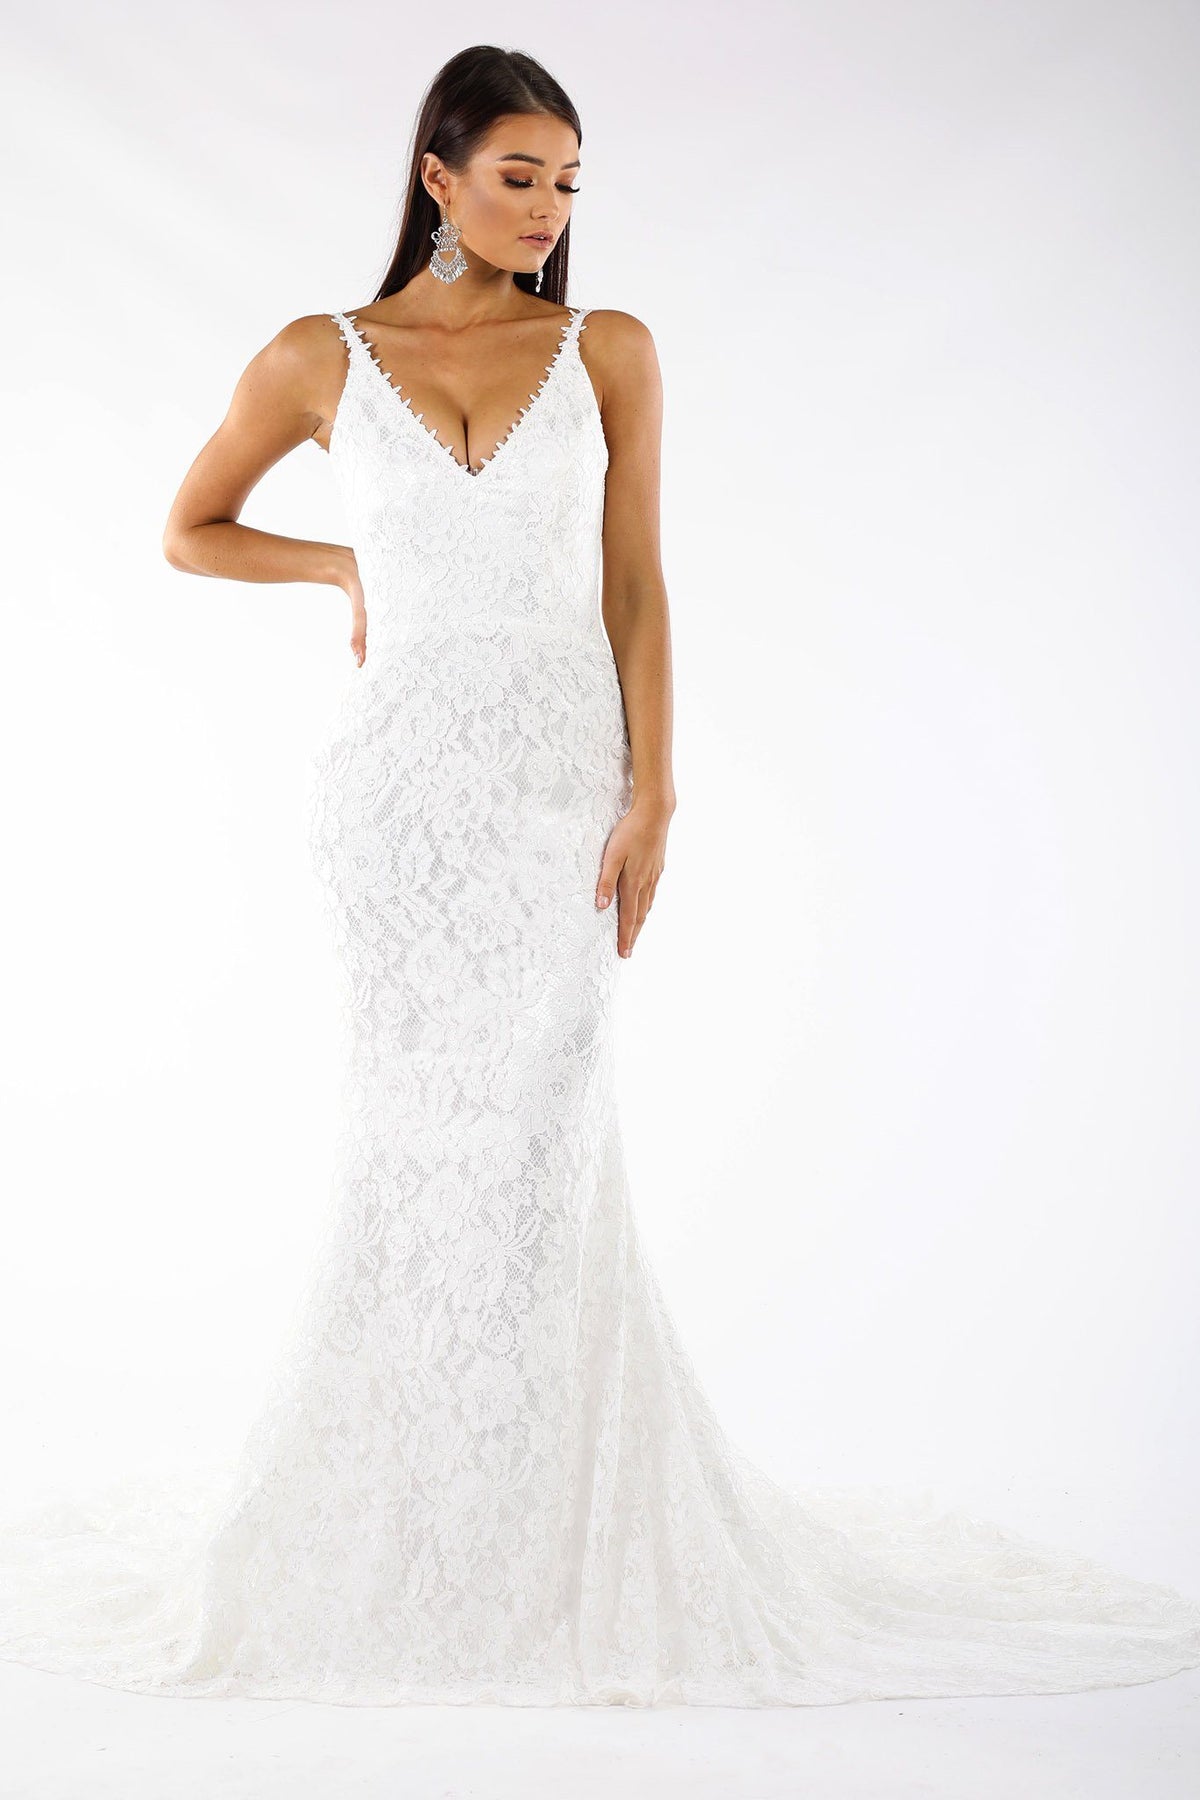 White sleeveless lace fitted maxi formal wedding dress V neck, lace trim shoulder straps, V backless, long train